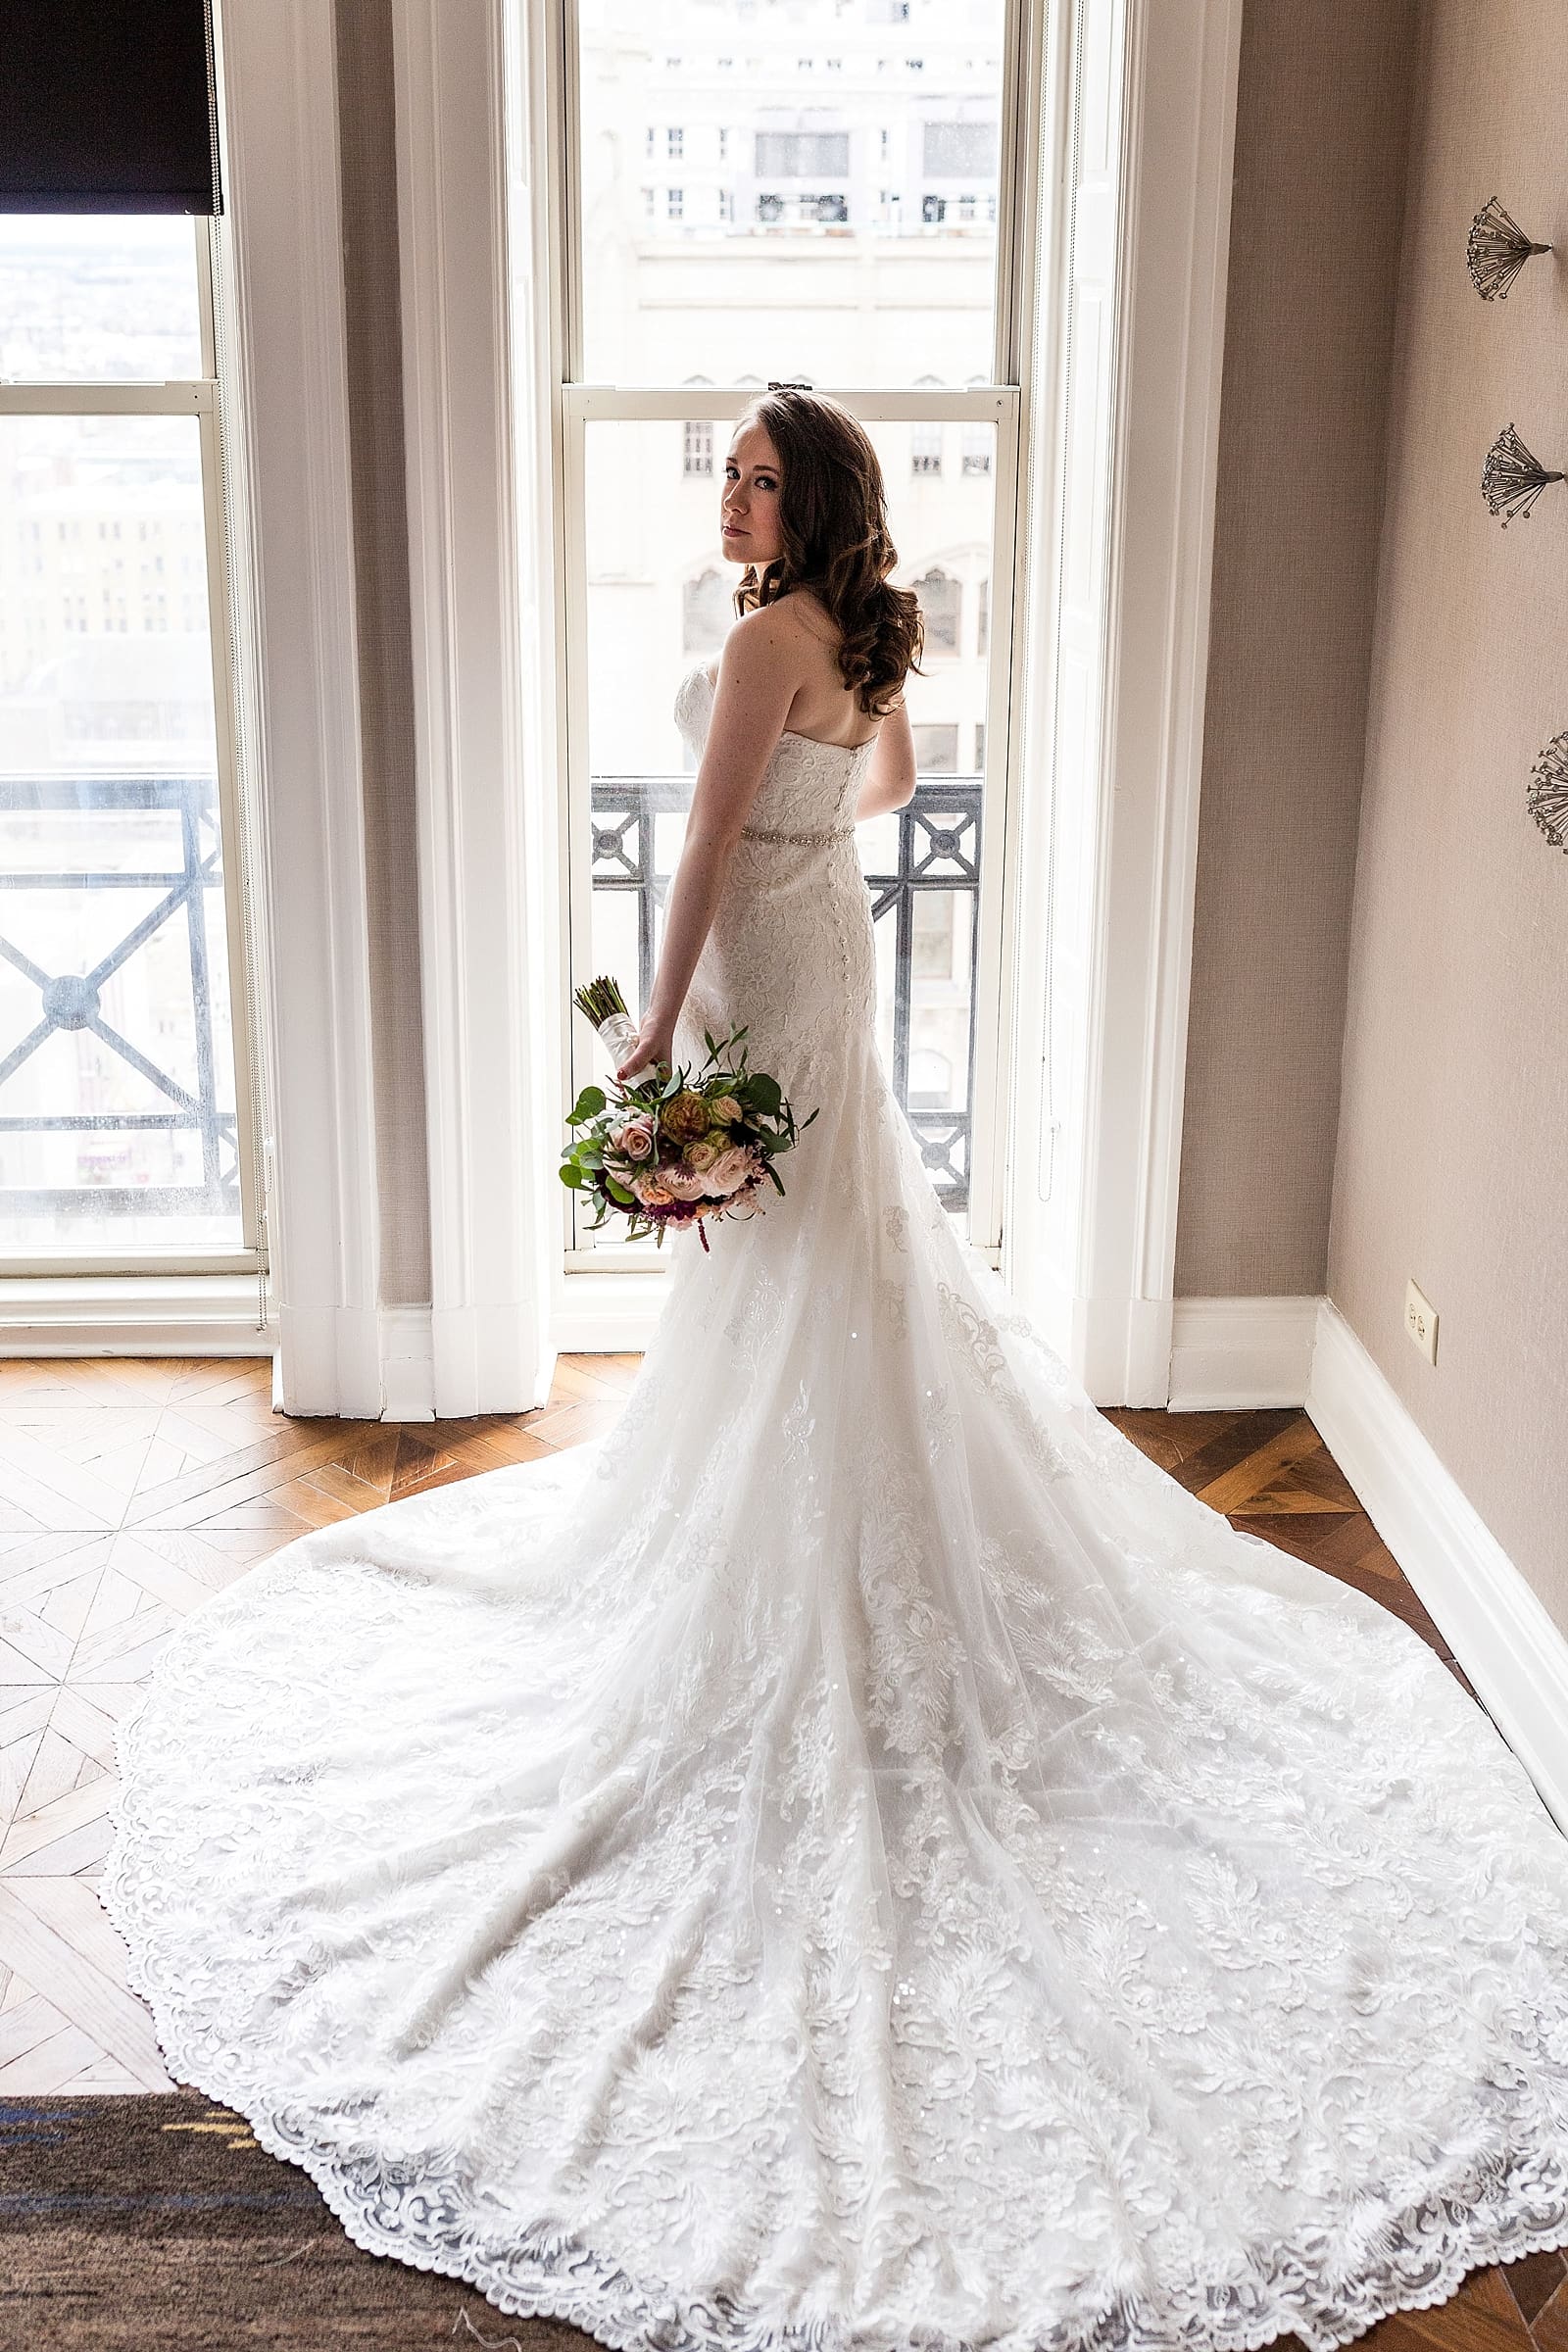 Bridal portrait from behind with bouquet, long wedding dress train and bridal bouquet 